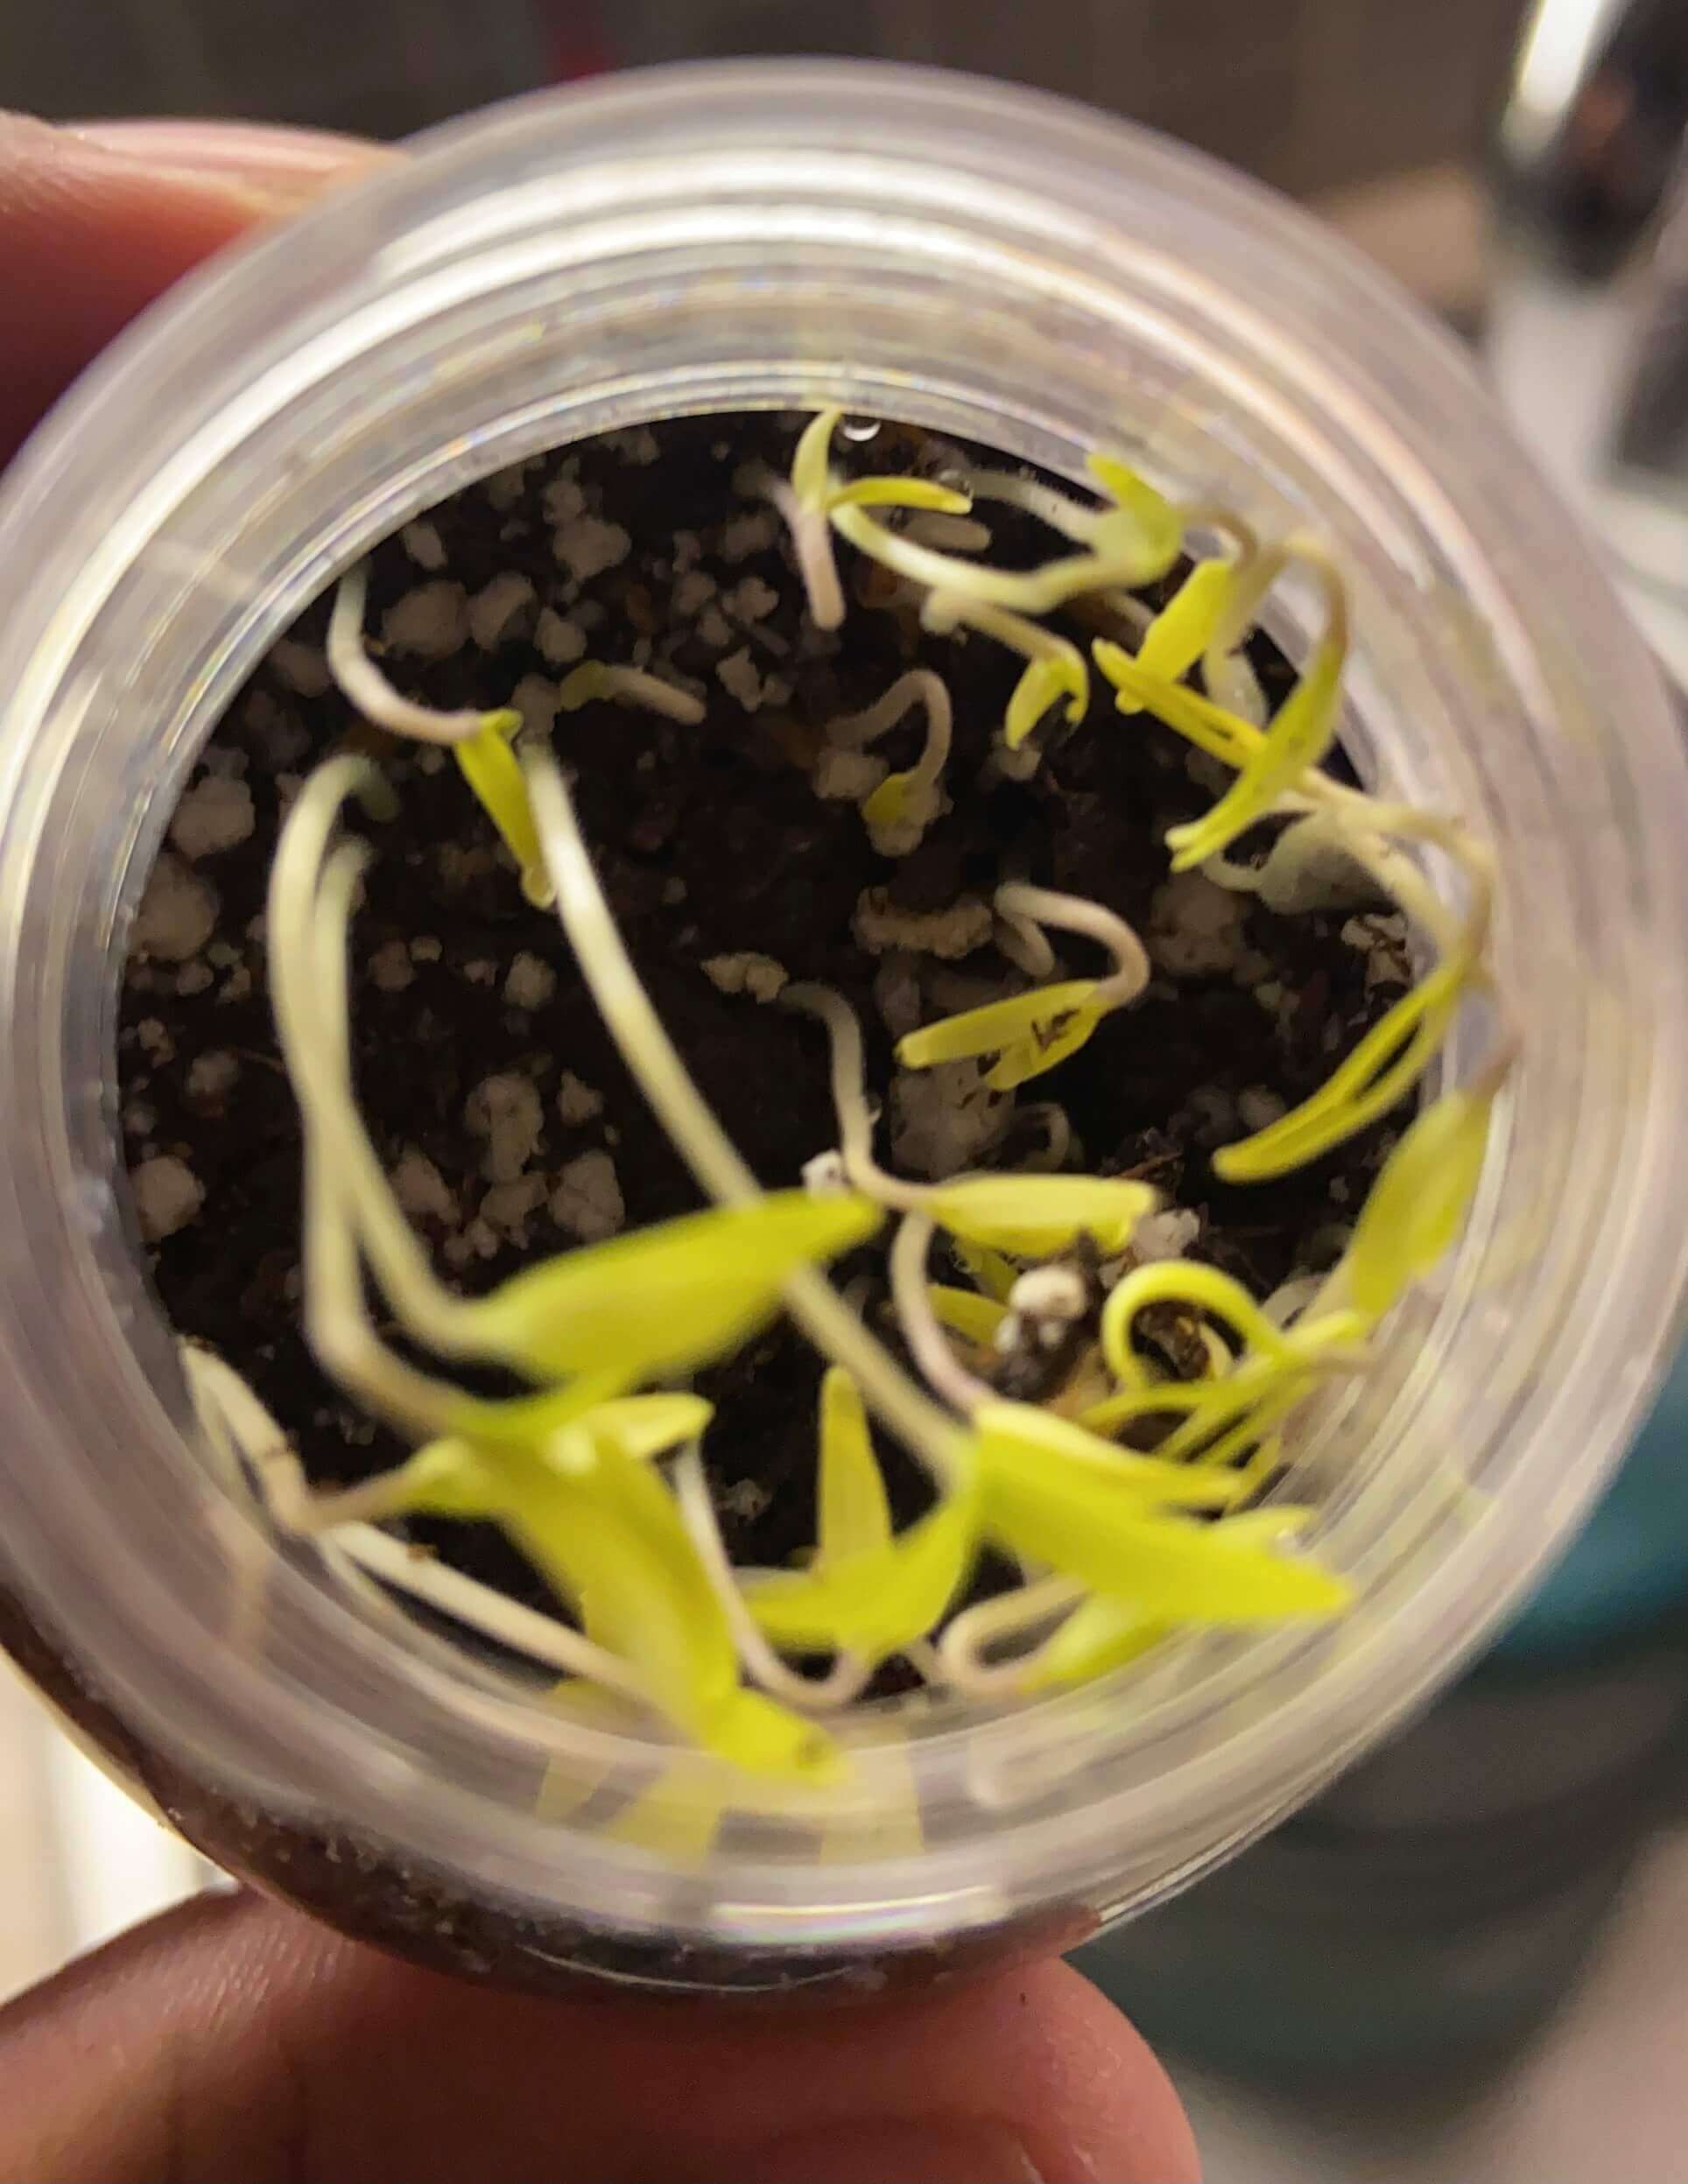 Leggy seedlings in a bottle due to overcrowding and lack of sunlight